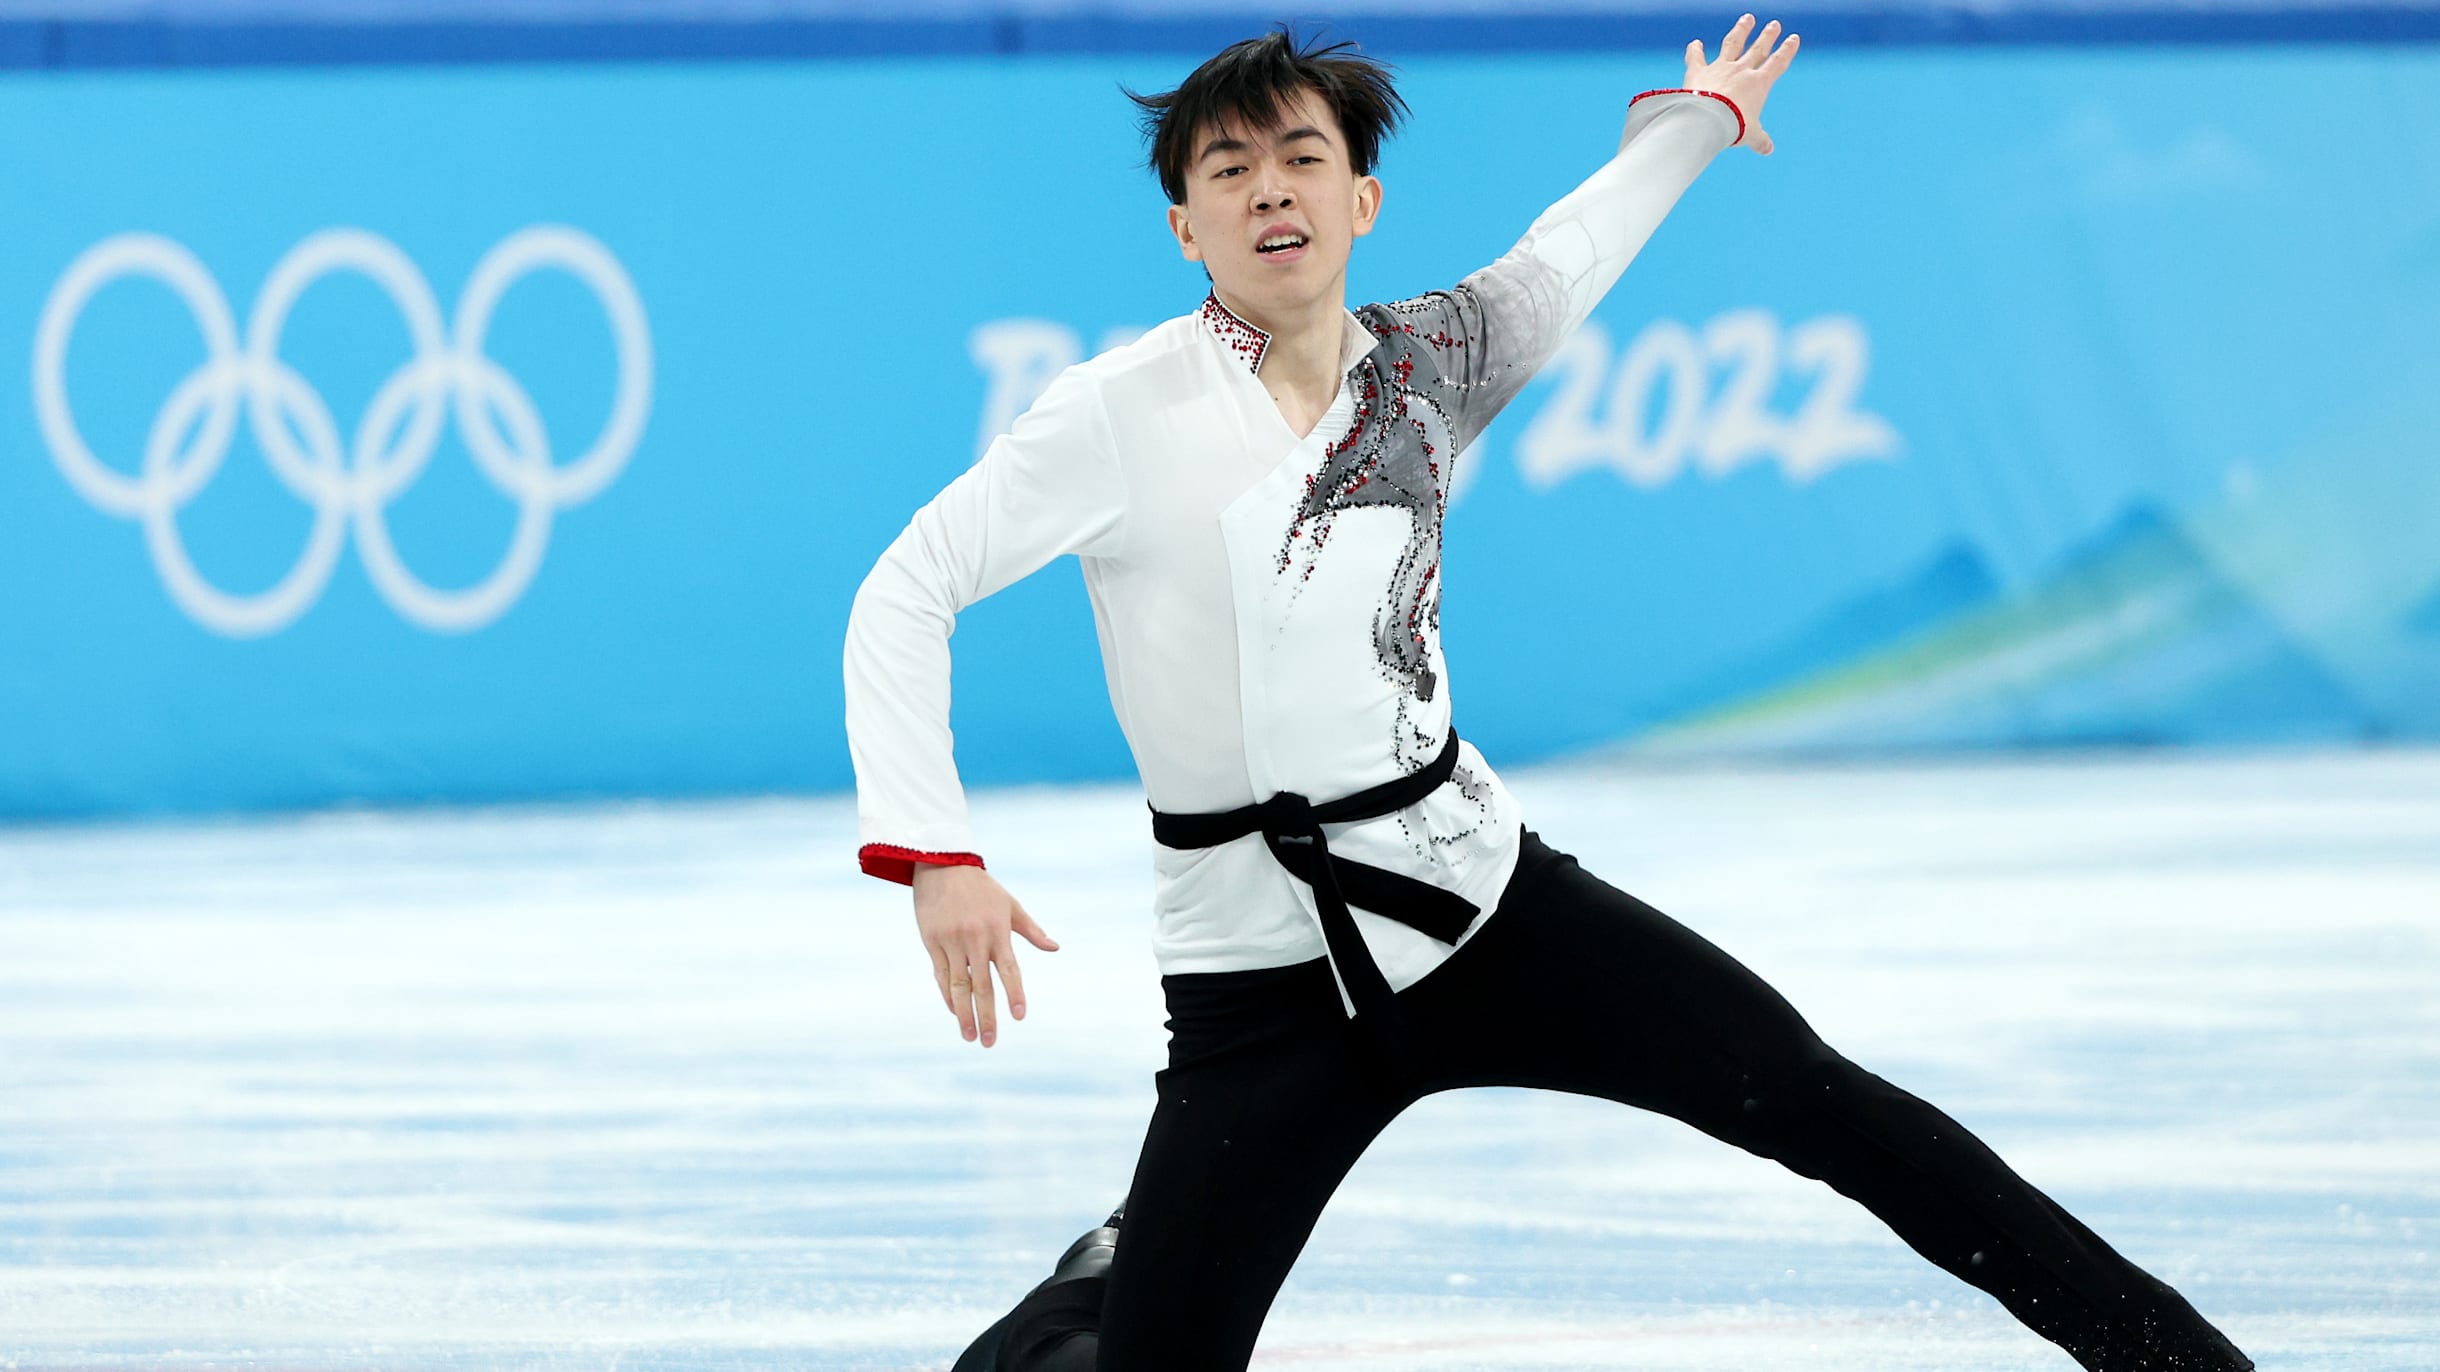 Vincent Zhou connects with Josh Groban, plans gala return at Beijing 2022 Im looking forward to skating on Olympic ice again